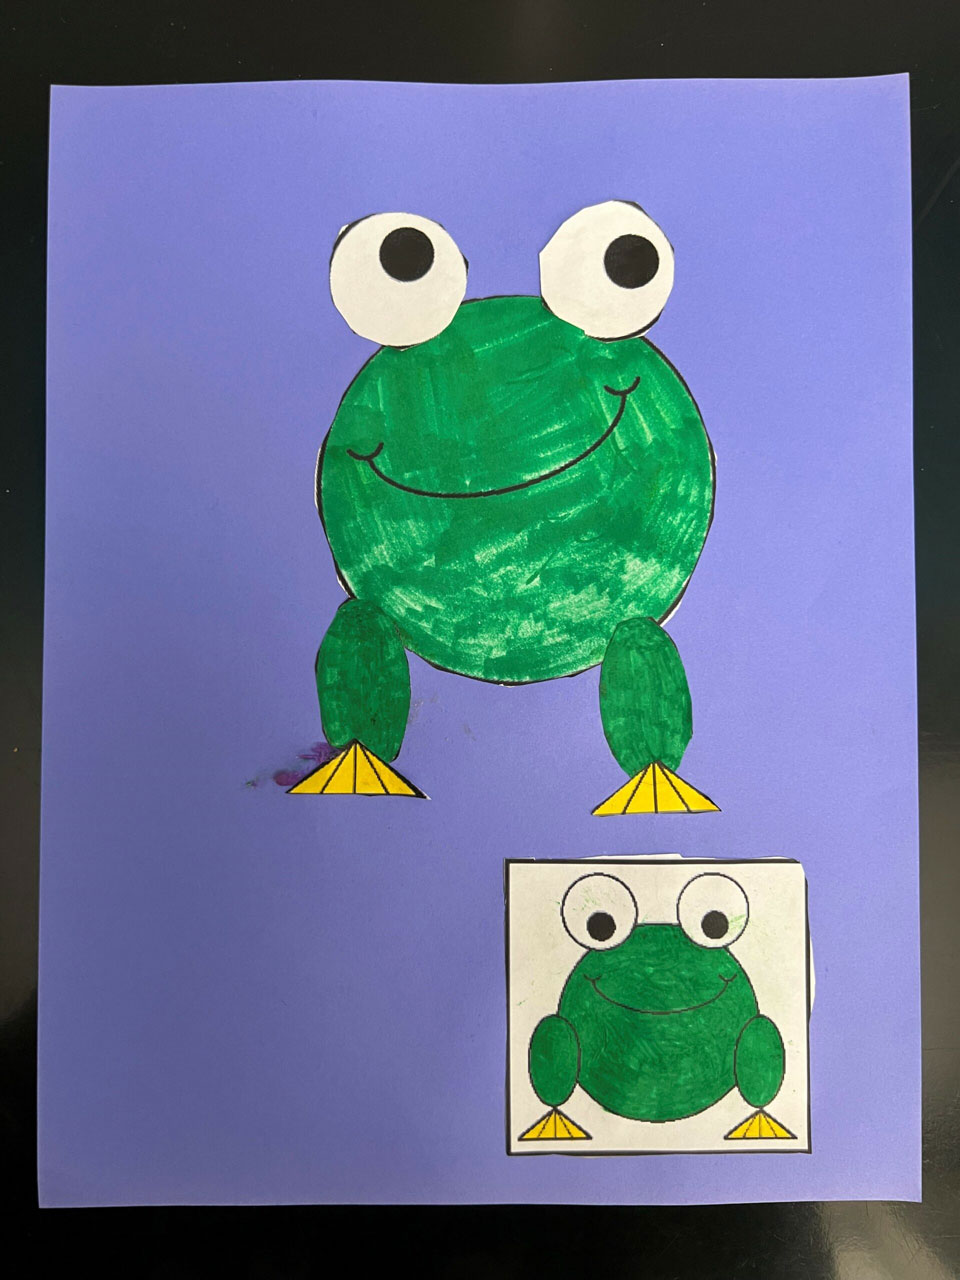 A green marker colored in paper frog glued onto a purple paper for its background.